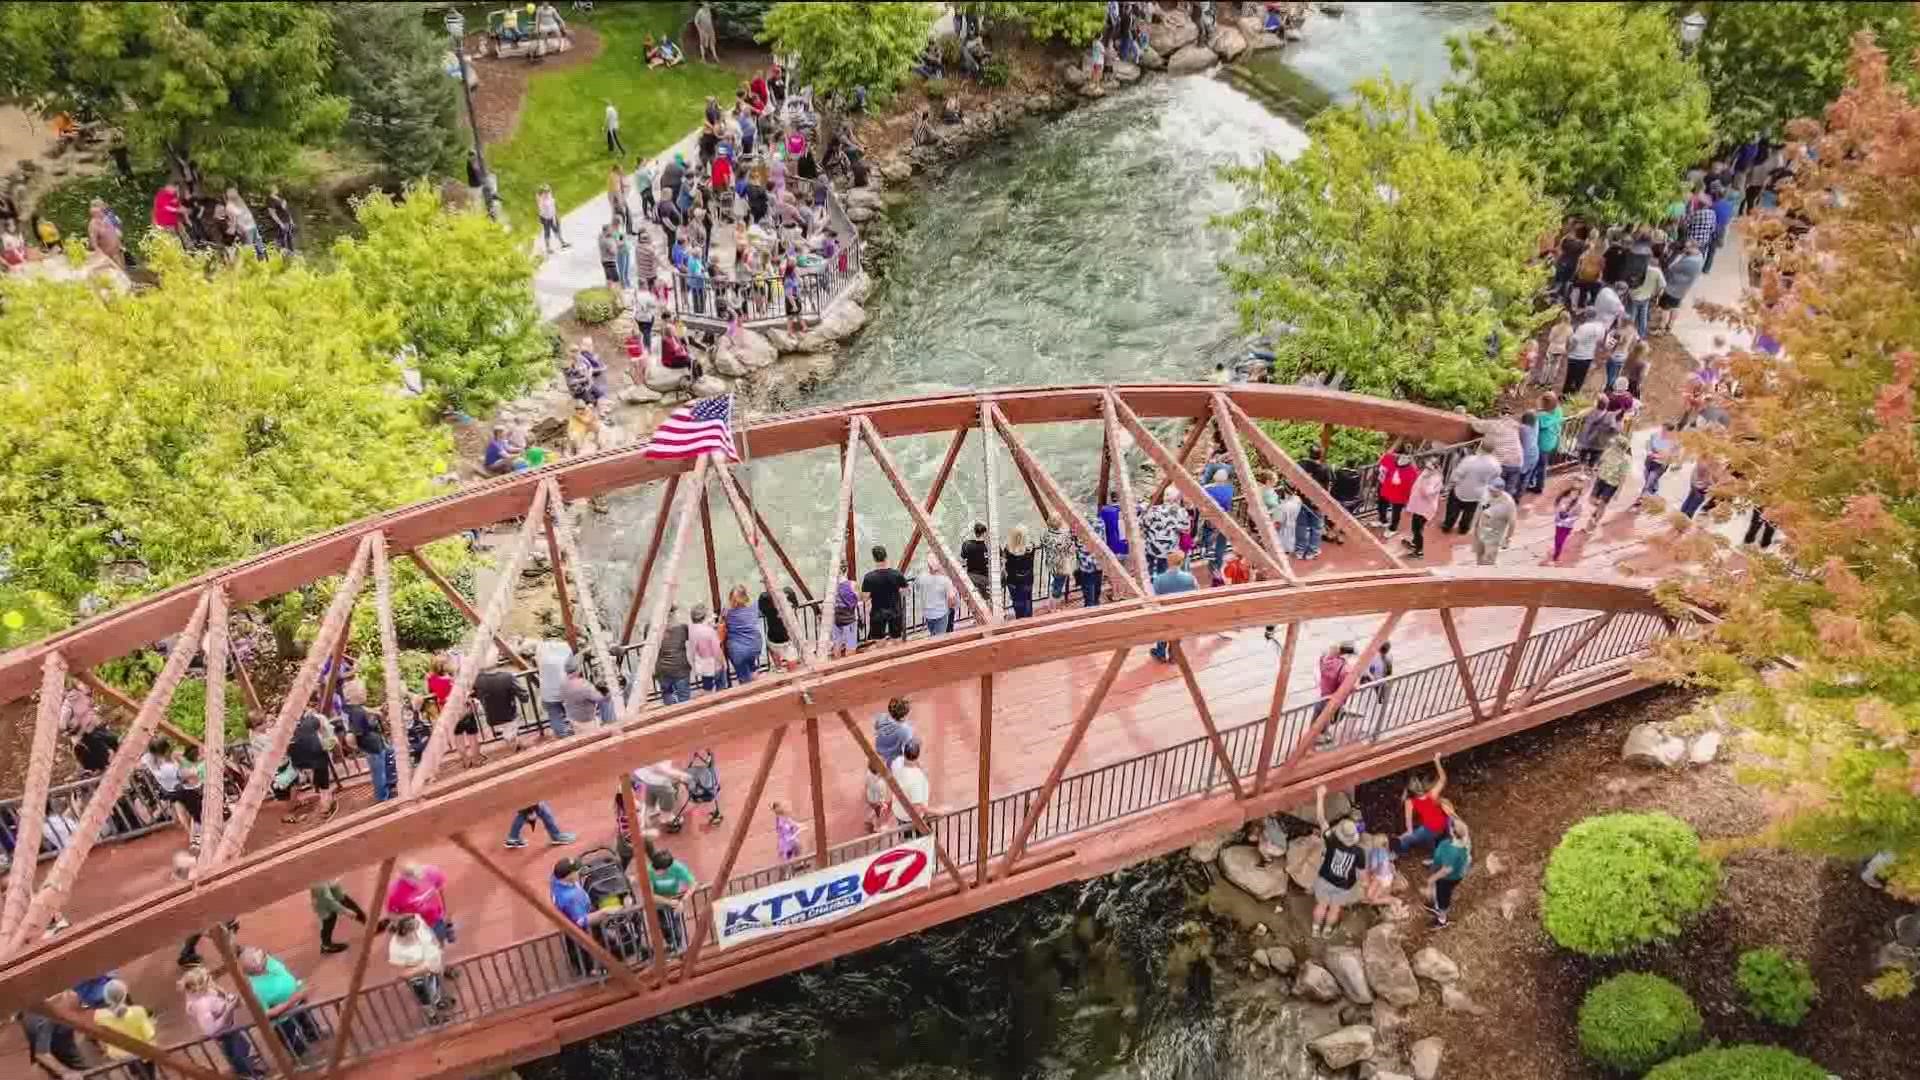 "Indian creek festival event is great for anyone in the treasure valley. It's great for families, for couples, there's something for everybody at this event."